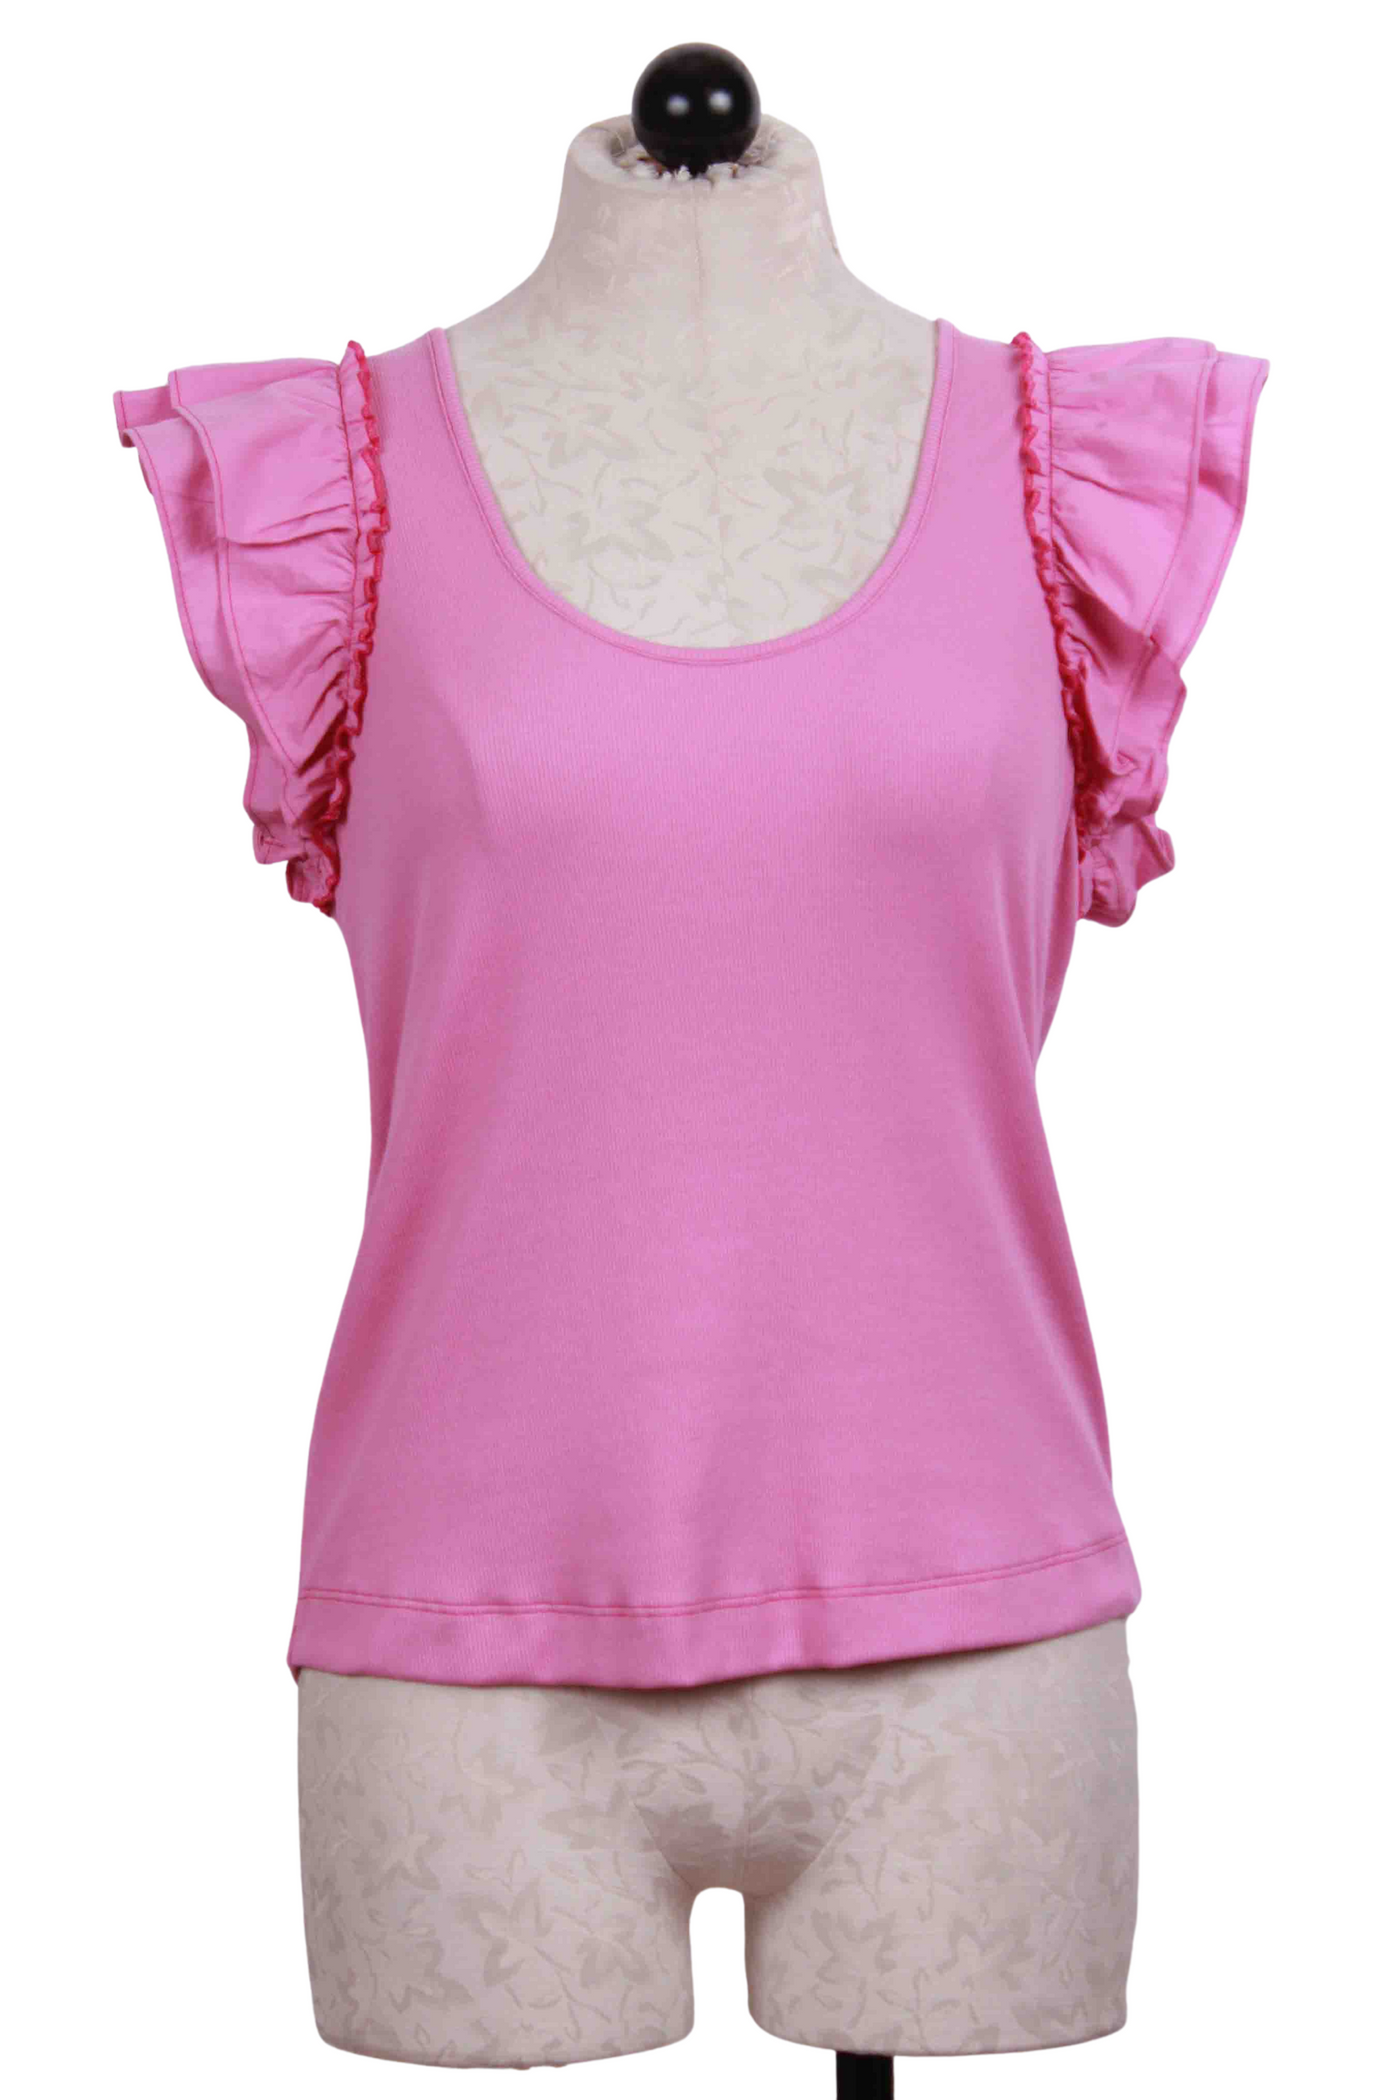 Azalea colored Anna Top by Marie Oliver